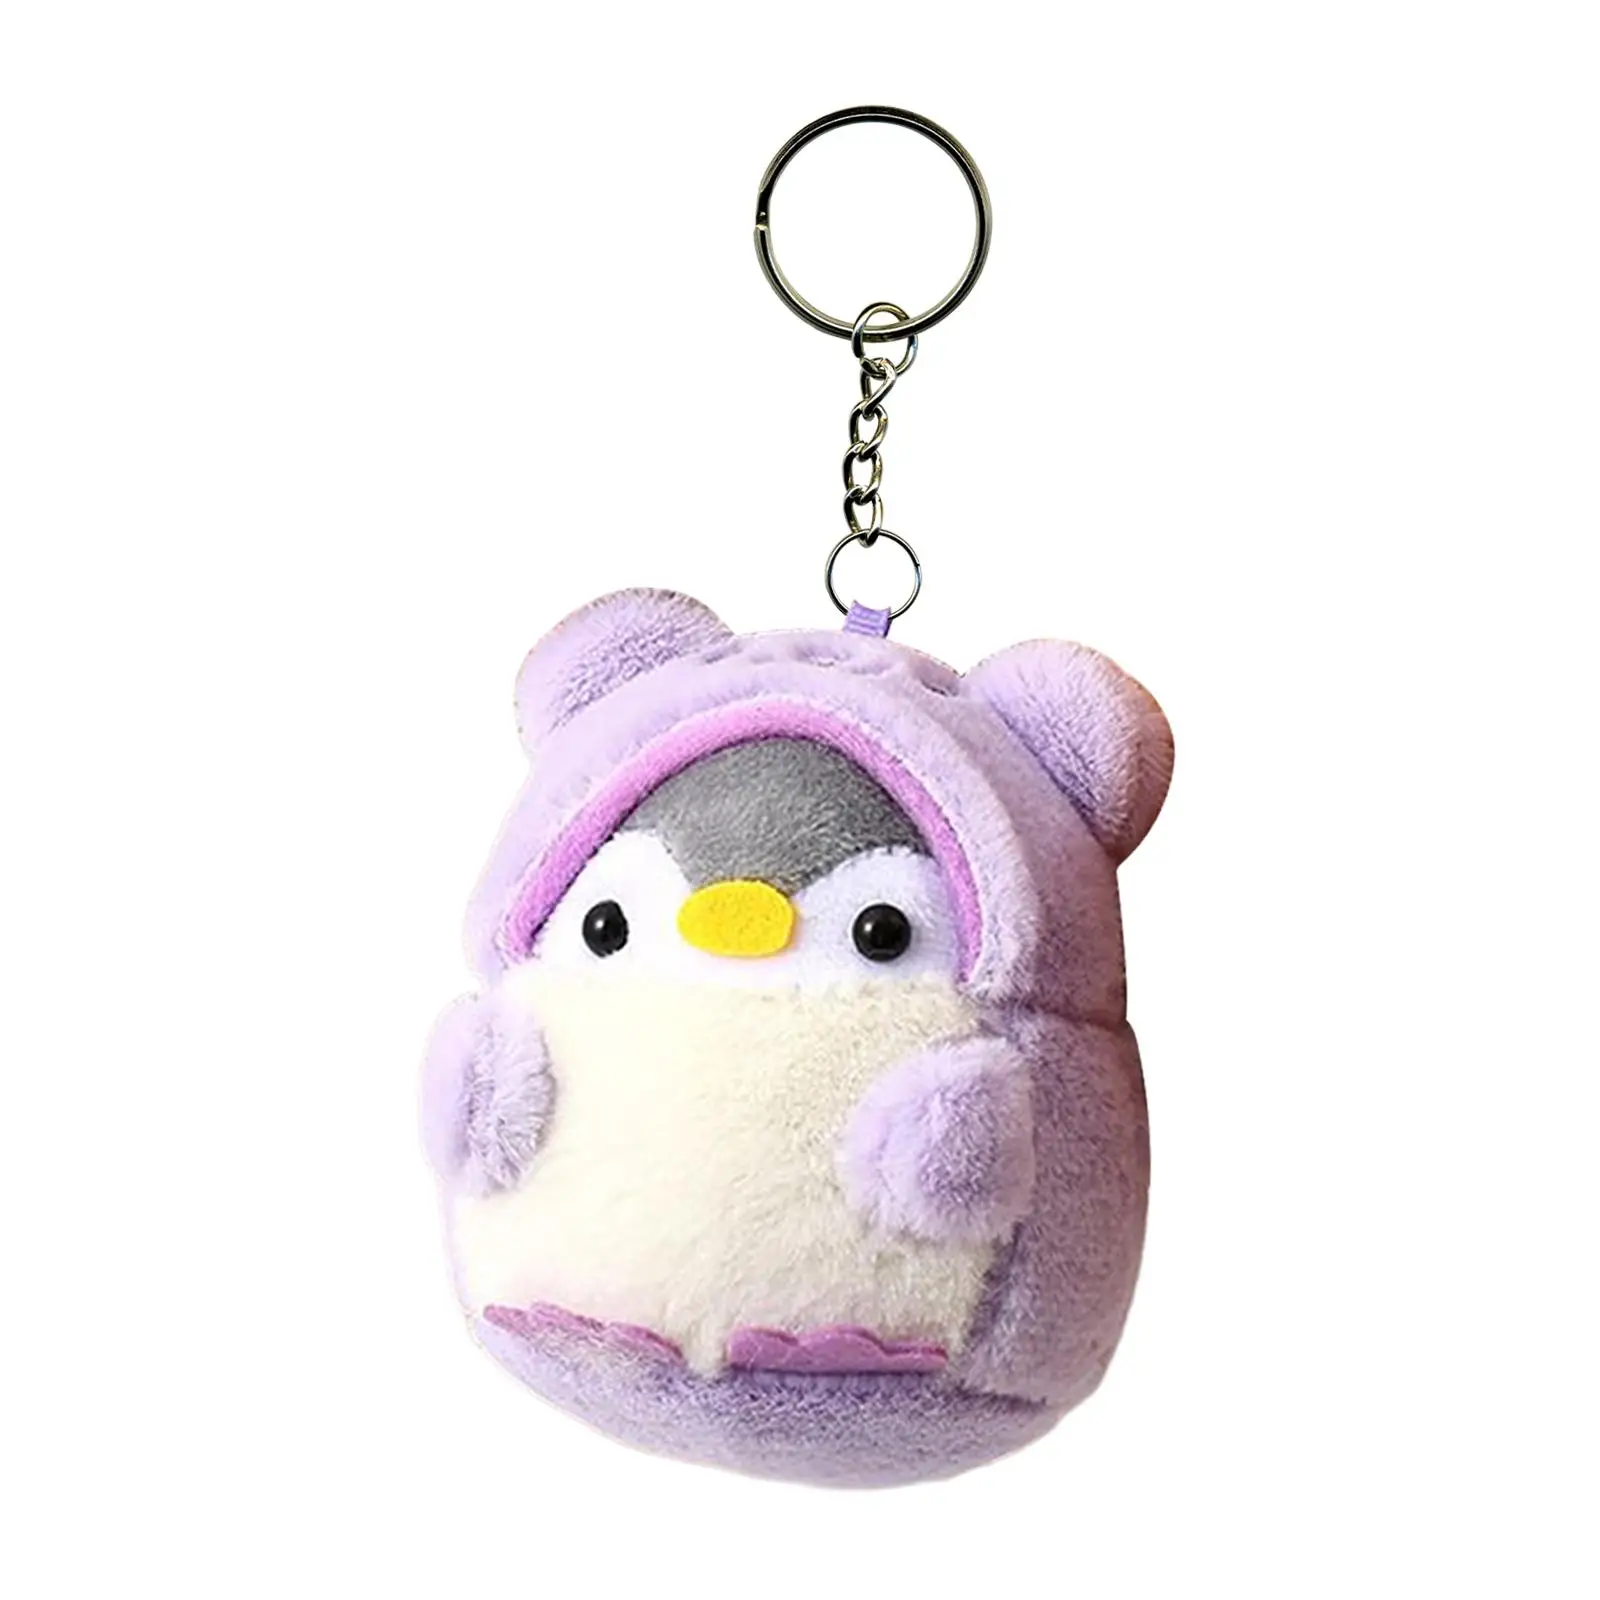 Penguin Doll Keychain Car Keychains Car Keyring for Backpack Tote Purse